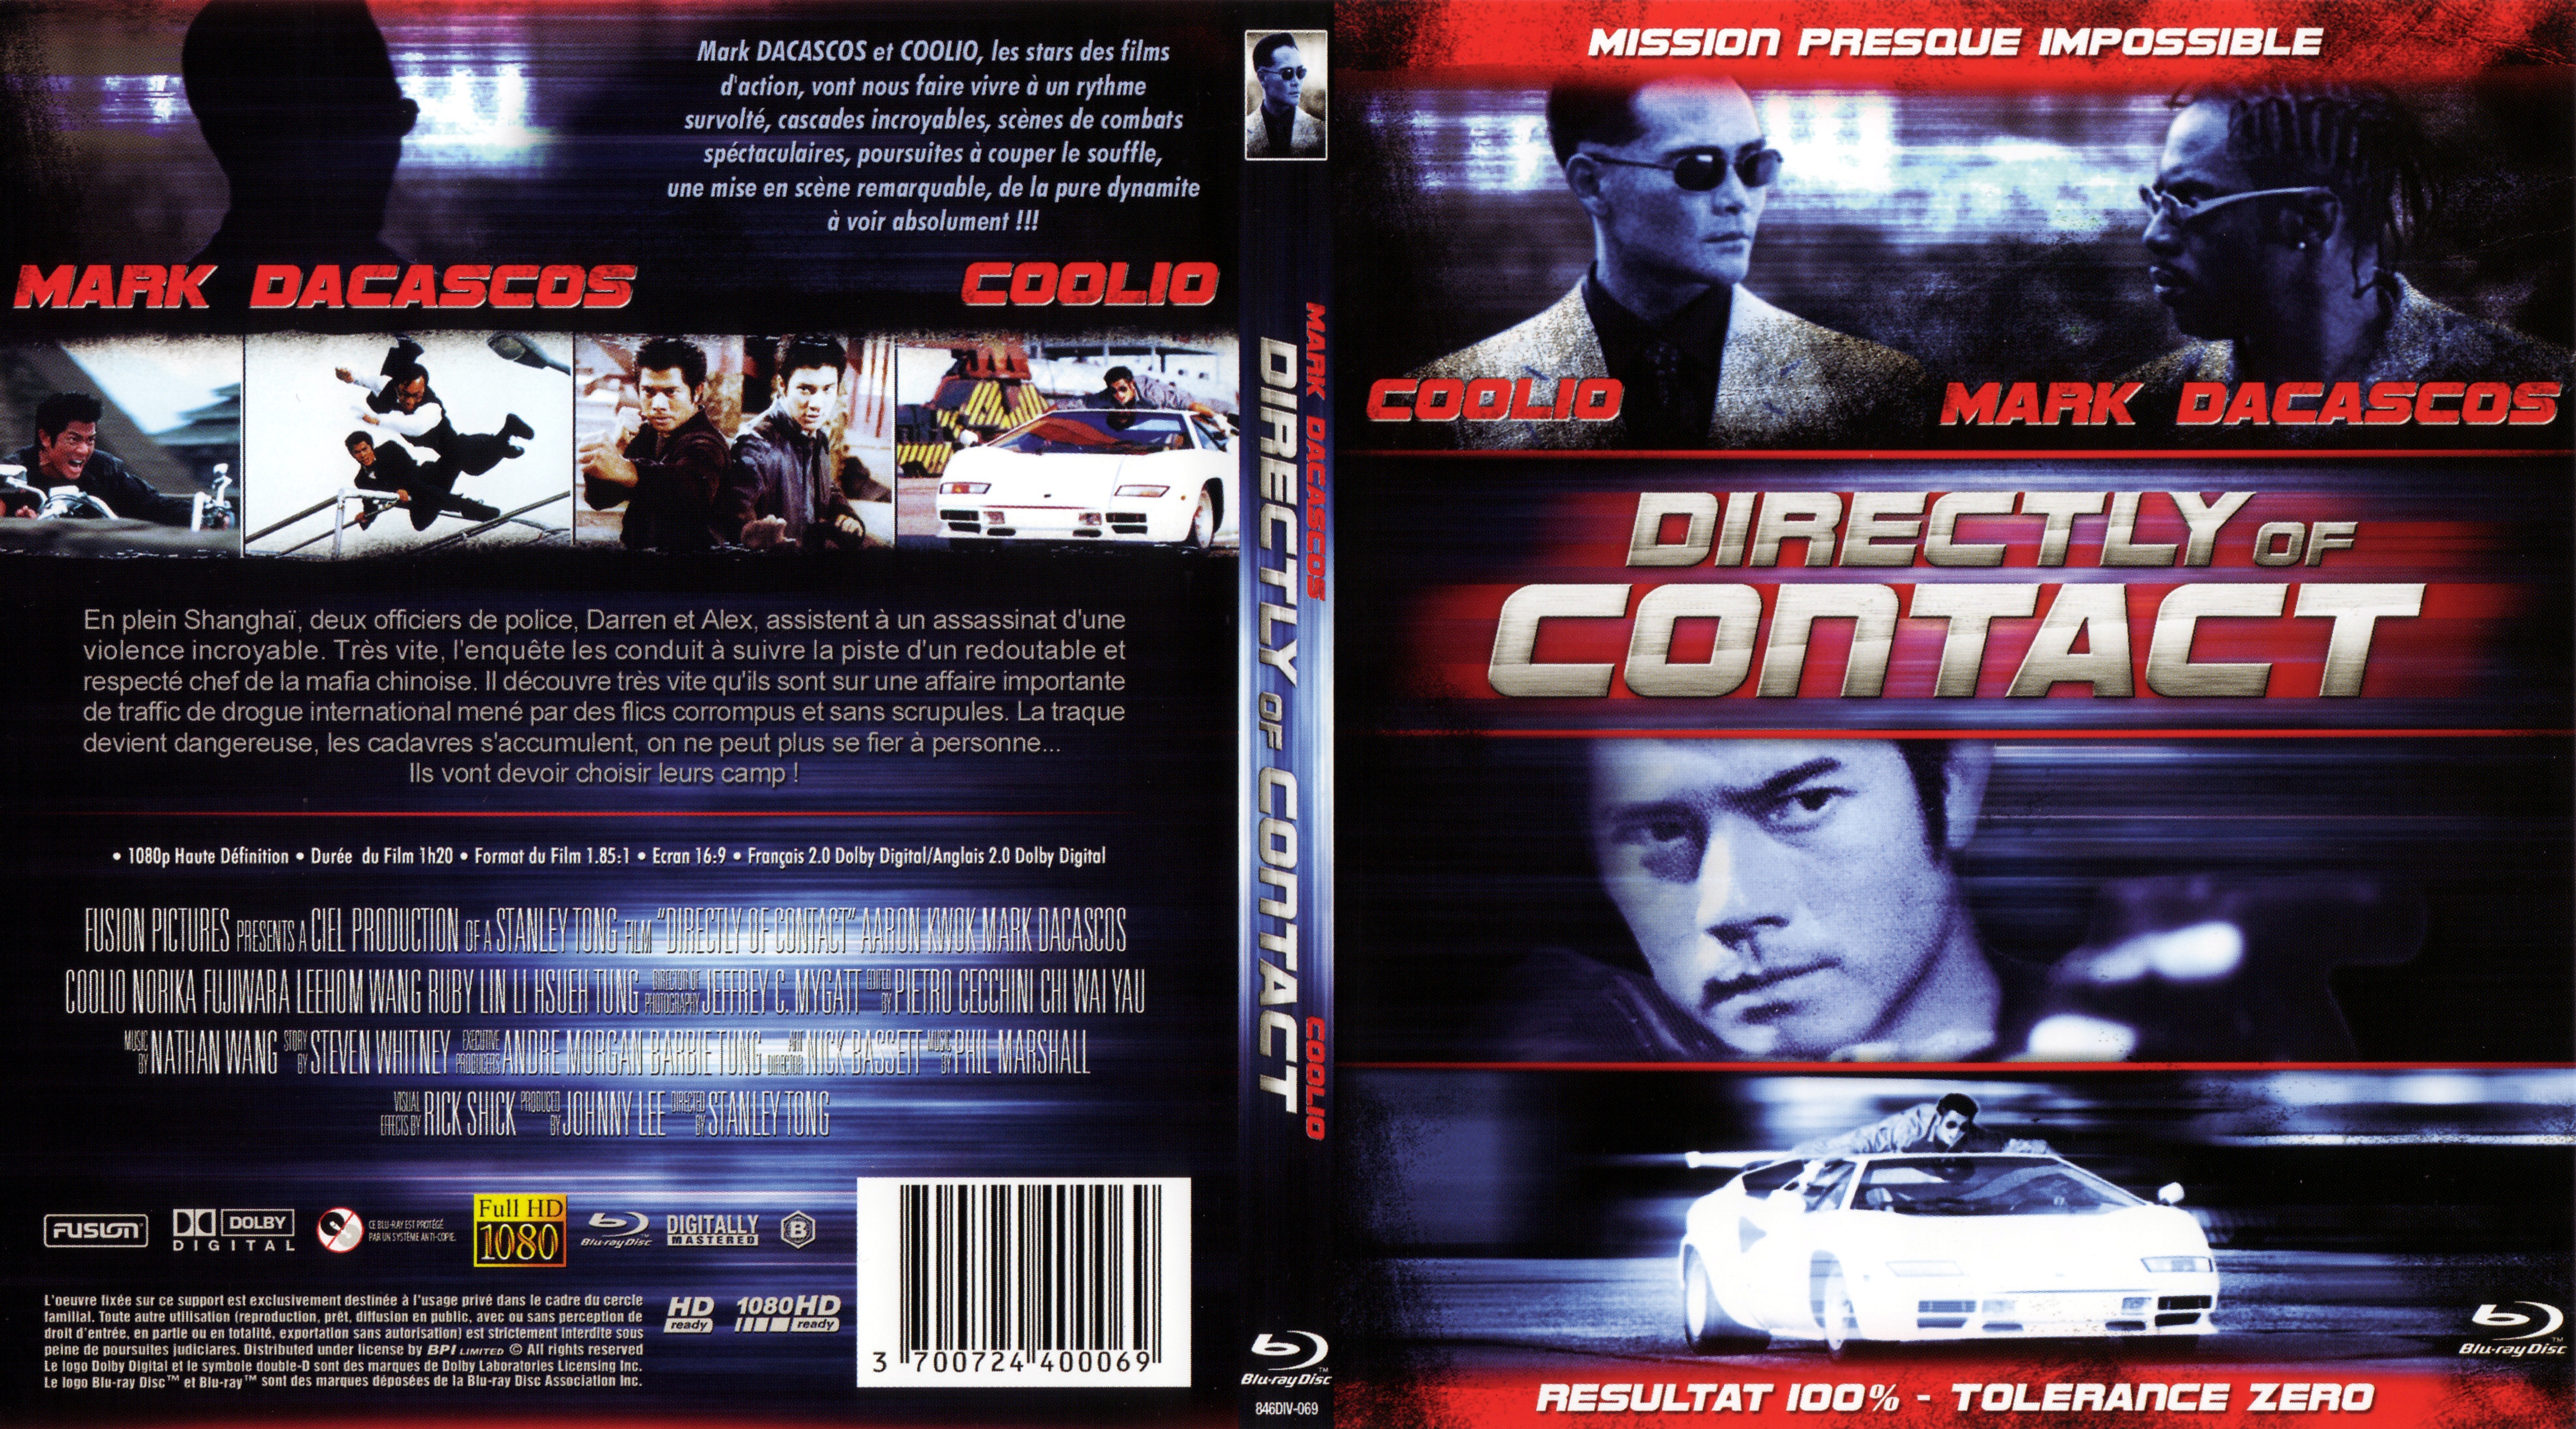 Jaquette DVD Directly of contact (BLU-RAY)